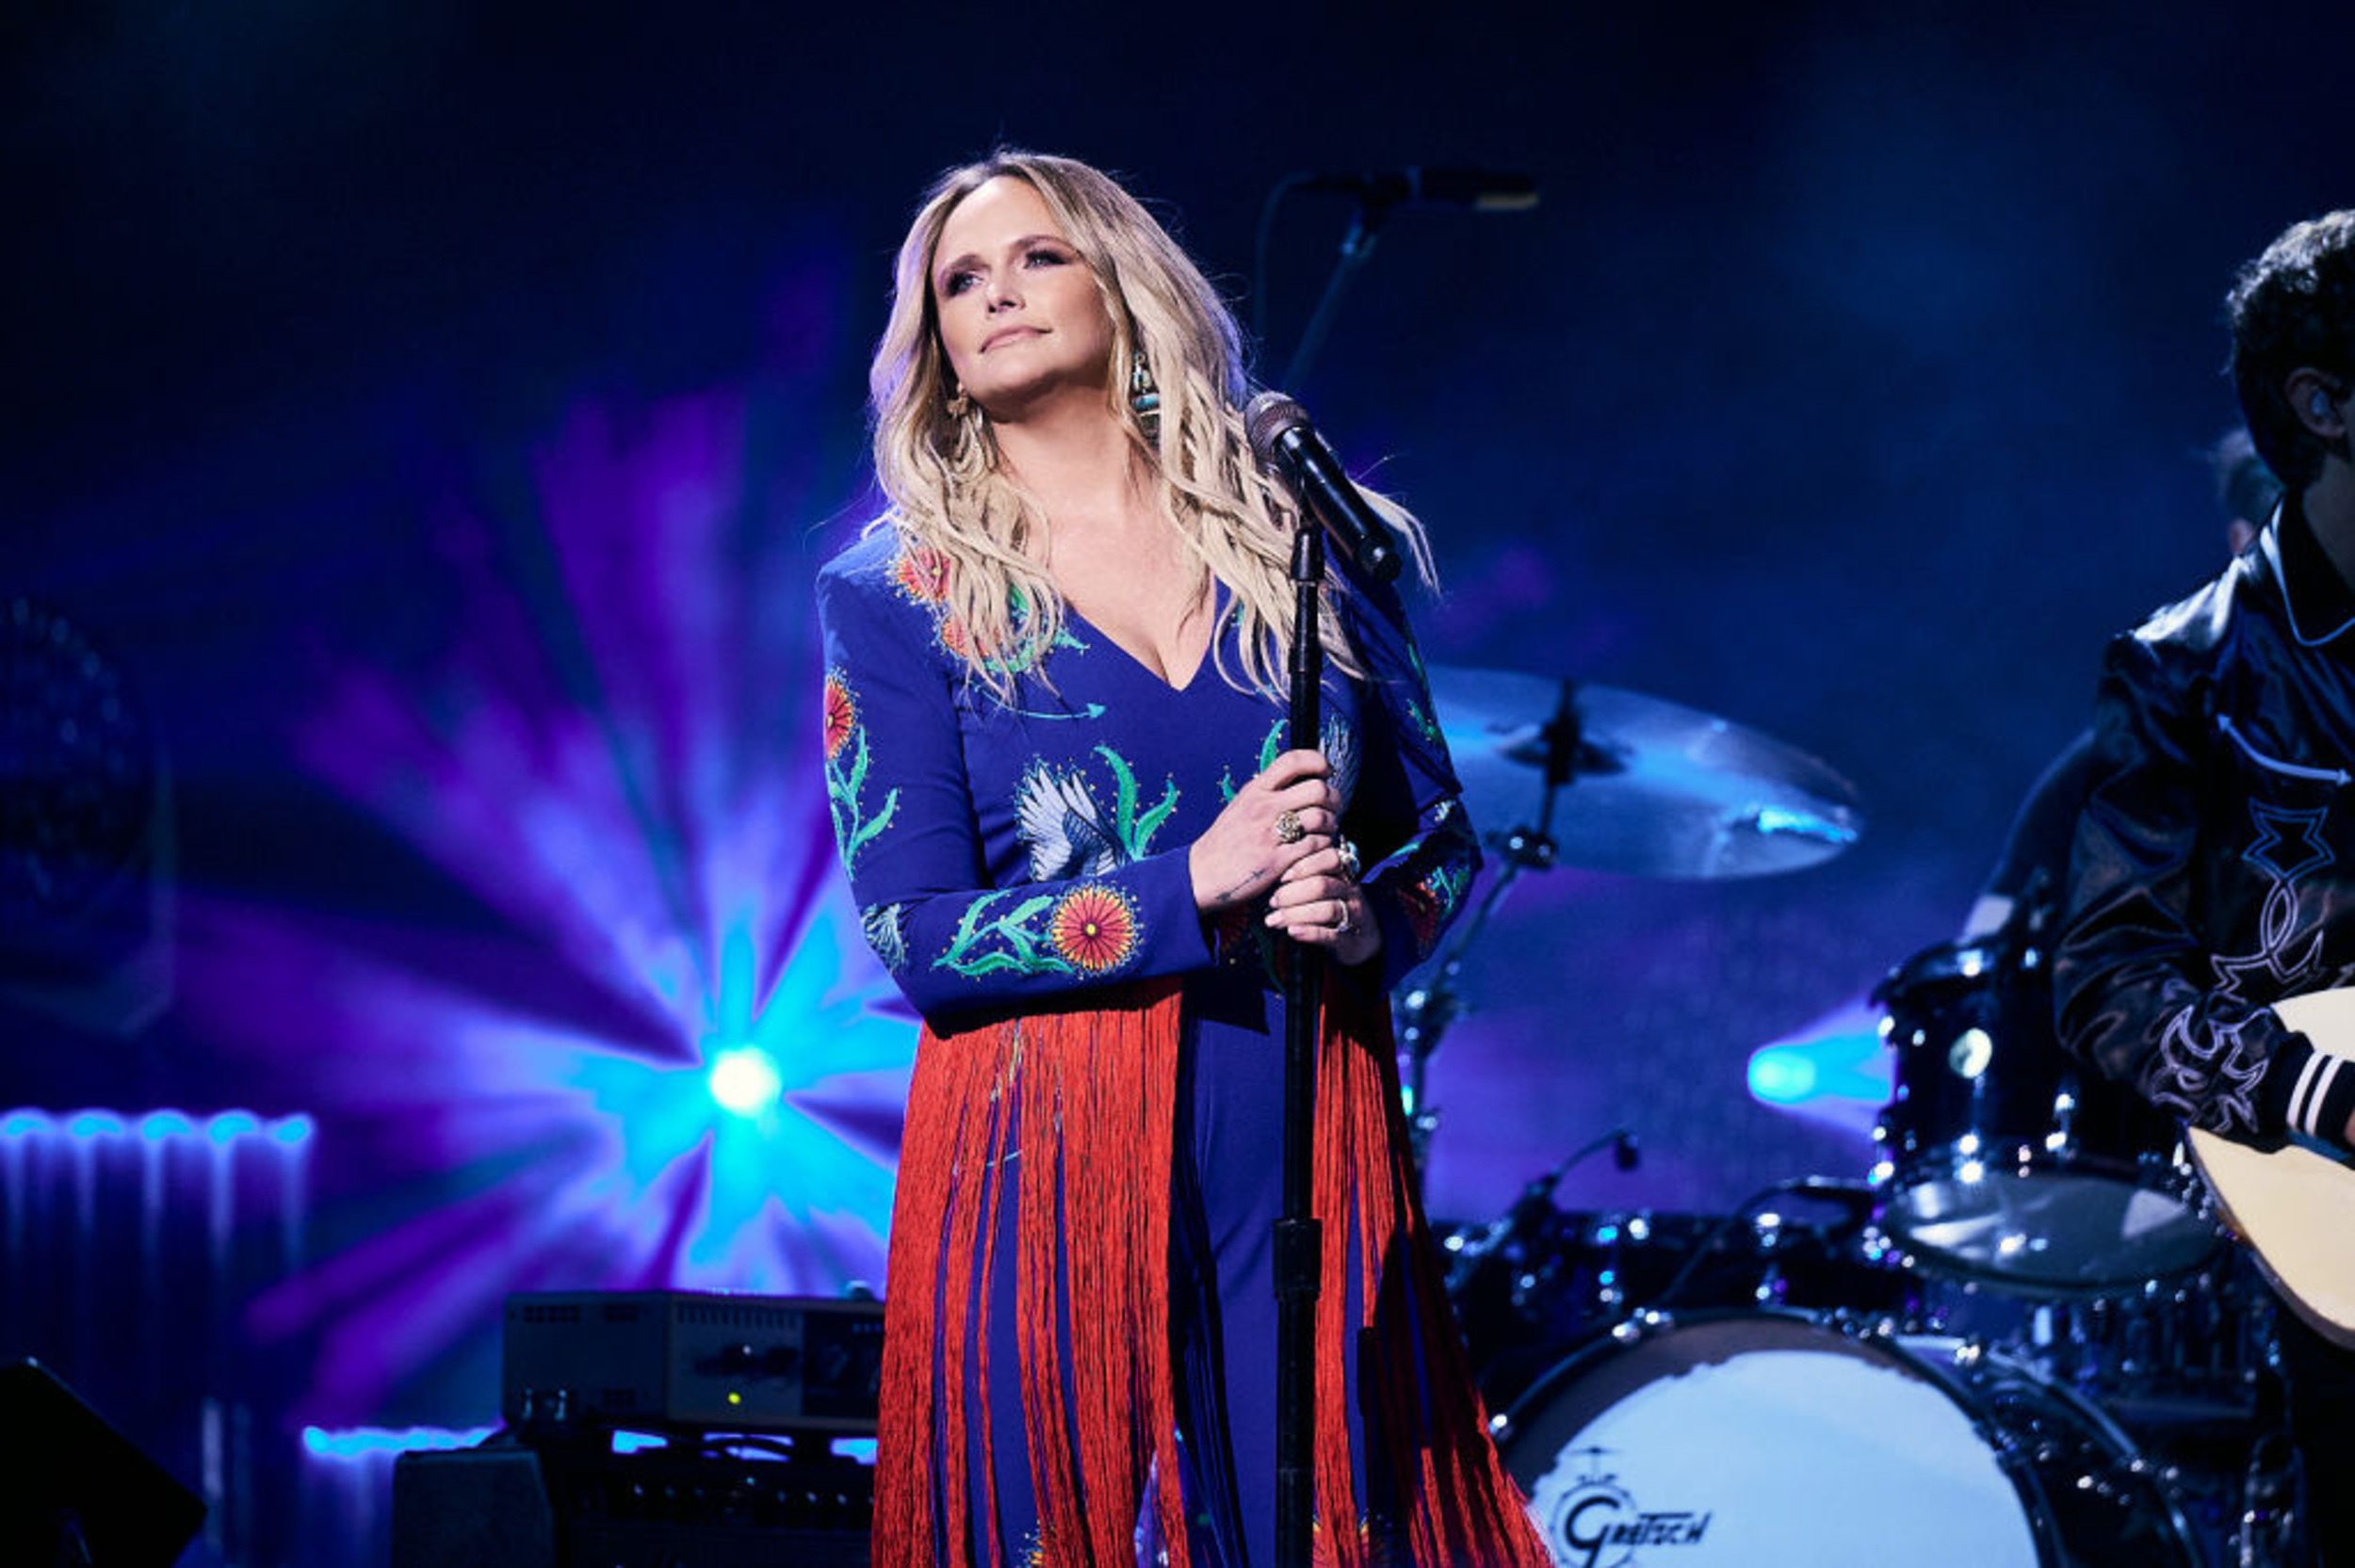 <p>Miranda Lambert's 2020 ballad "Settling Down" is essential for anyone who, like Lambert sings in this song, has their "feet on the ground and head up in the clouds." </p><p>You may also like: <a href='https://www.yardbarker.com/entertainment/articles/room_with_a_view_the_20_best_hotels_on_screen_020924/s1__39920869'>Room with a view: The 20 best hotels on screen</a></p>